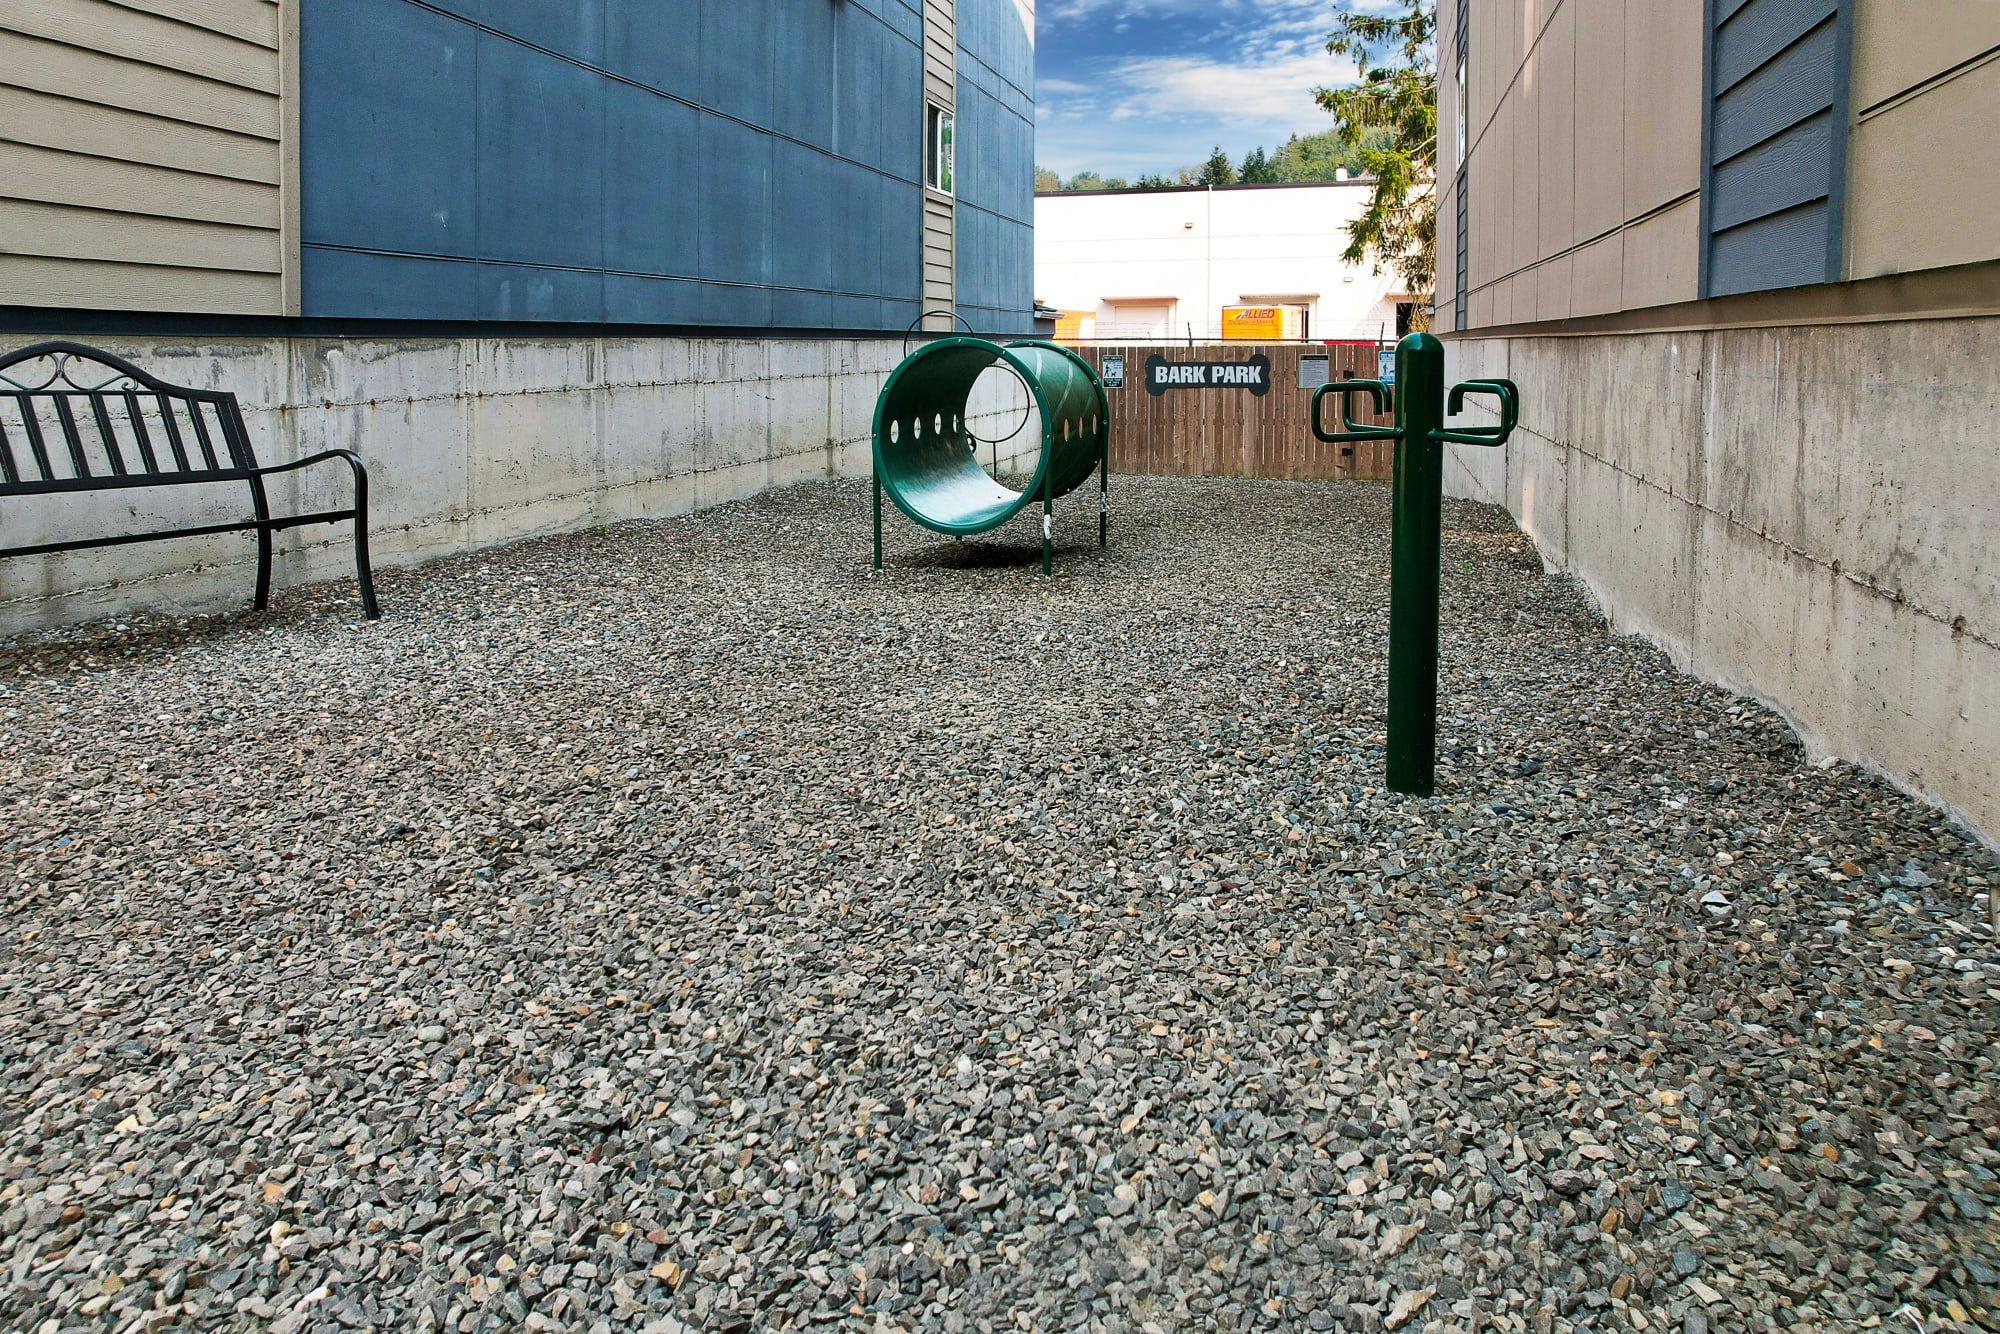 The dog park at Karbon Apartments in Newcastle, Washington